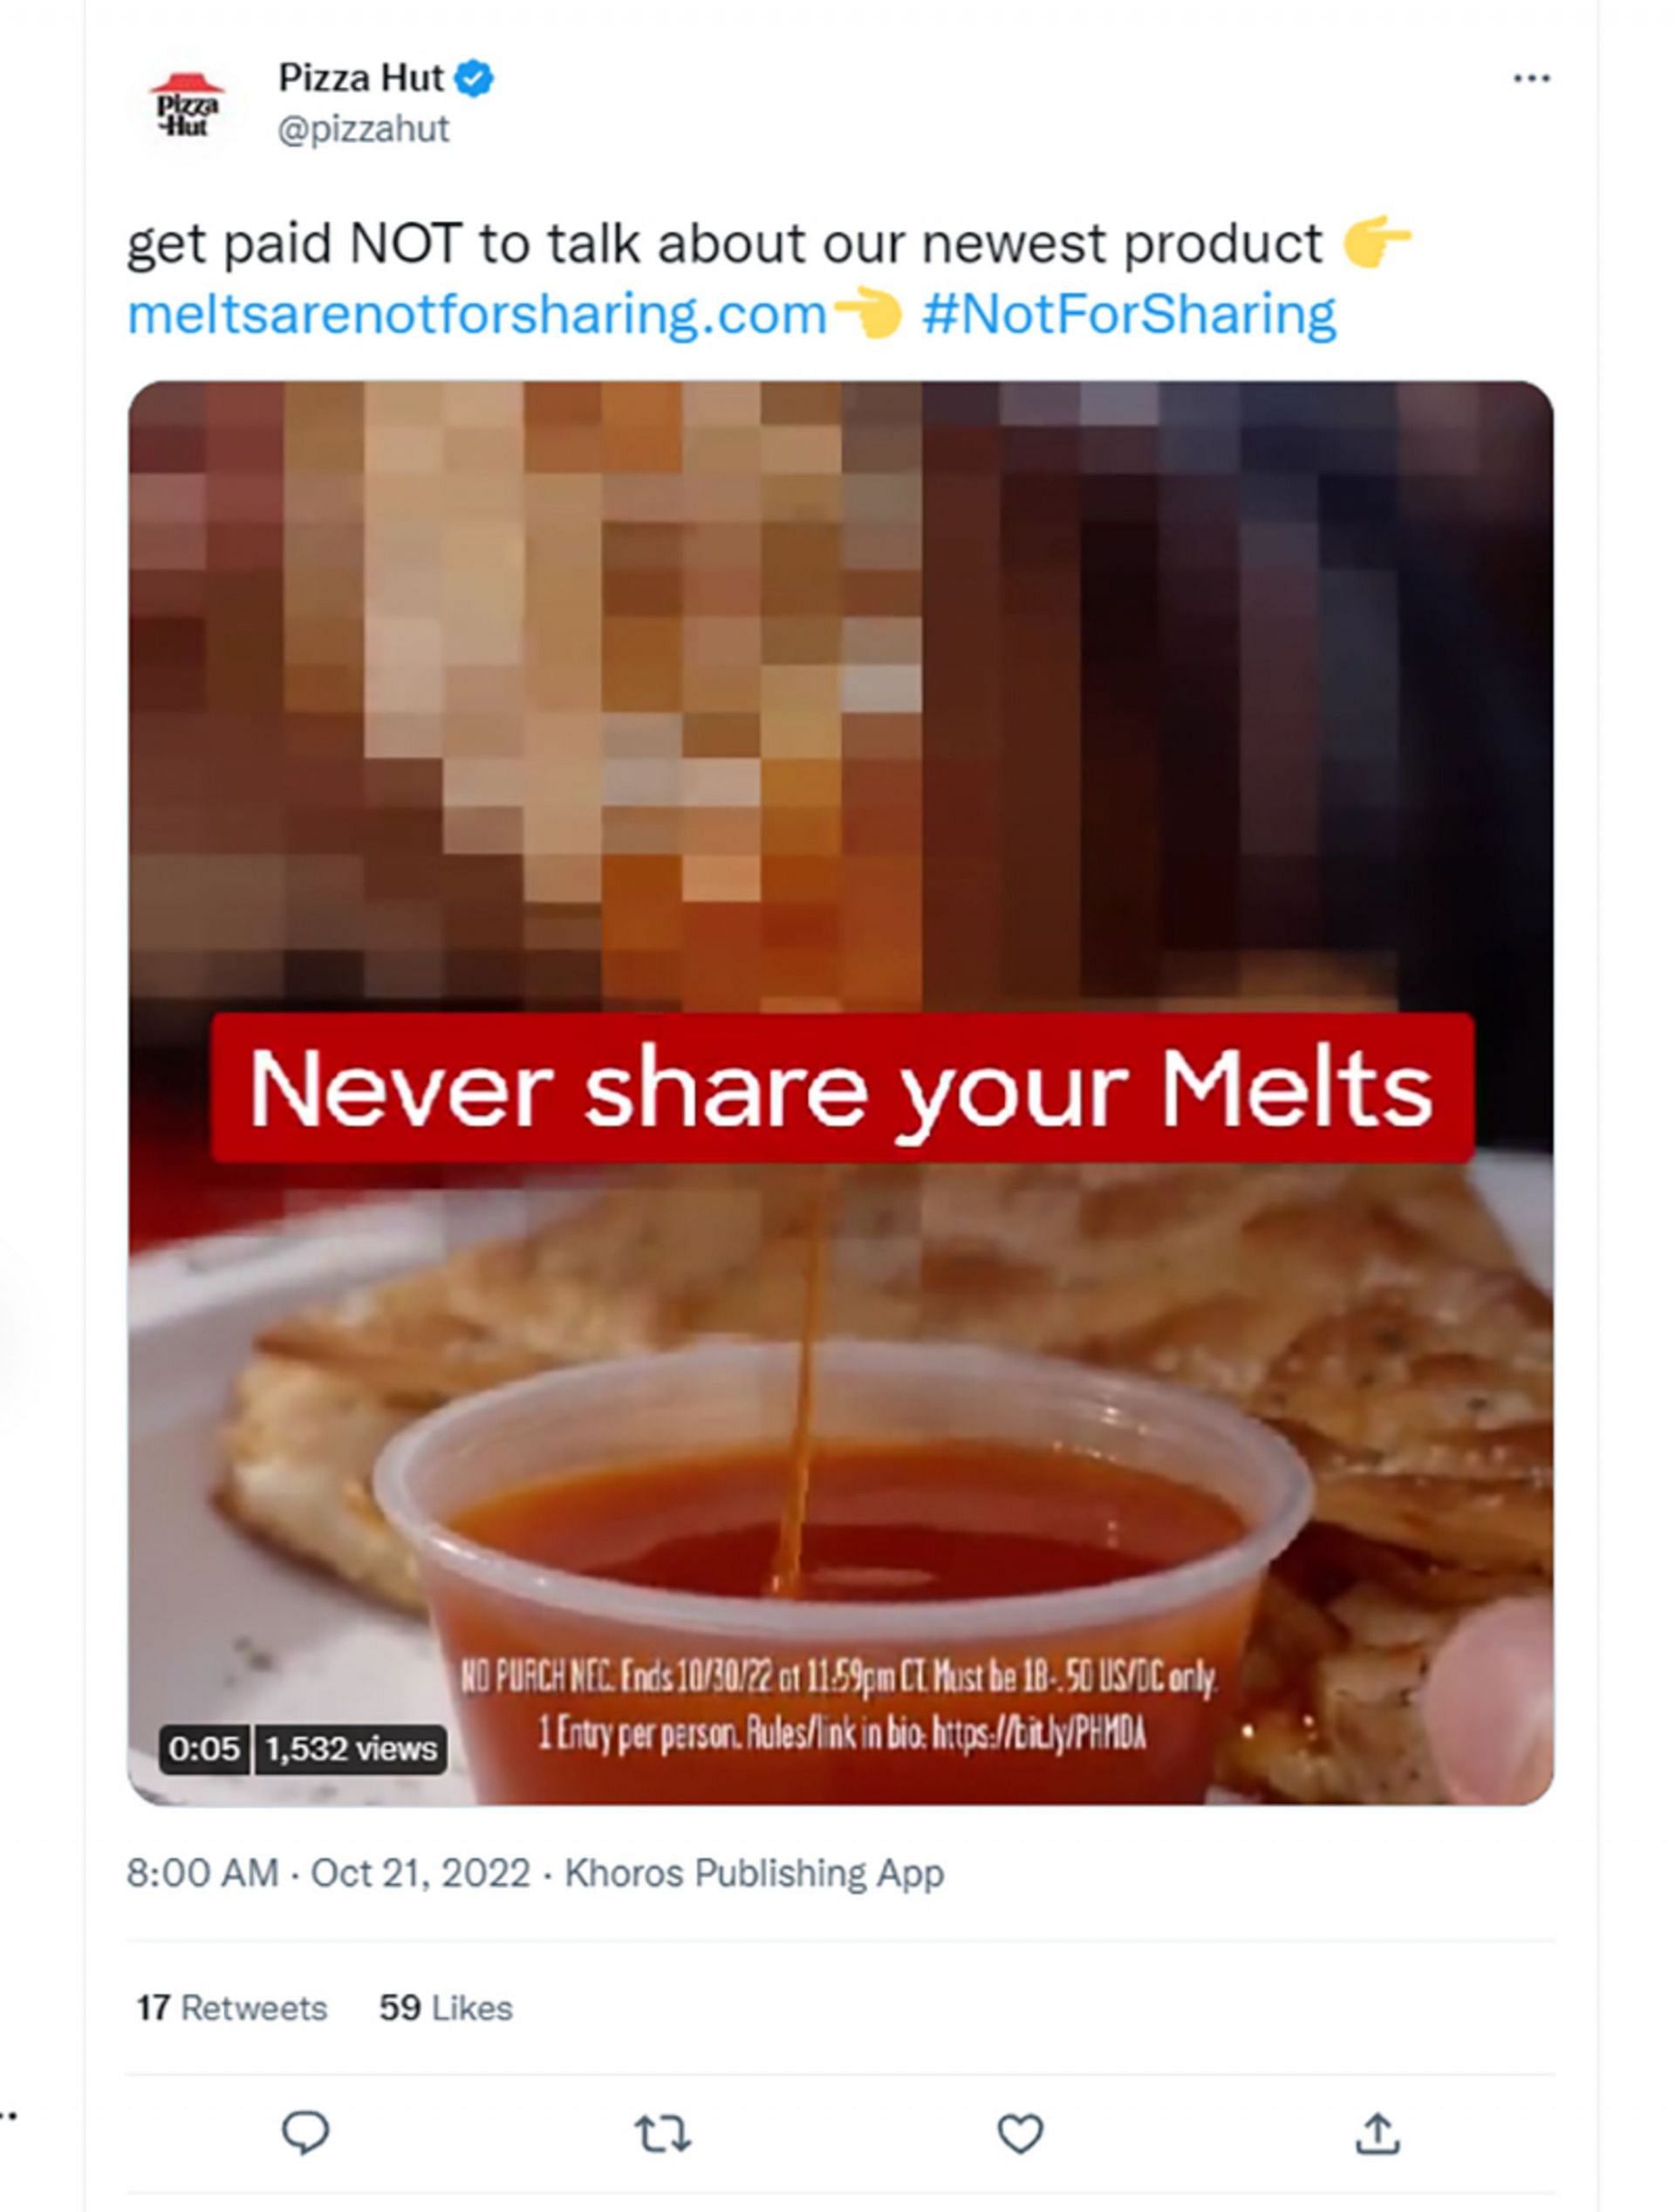 Promotional material for Melts via Twitter/@pizzahut